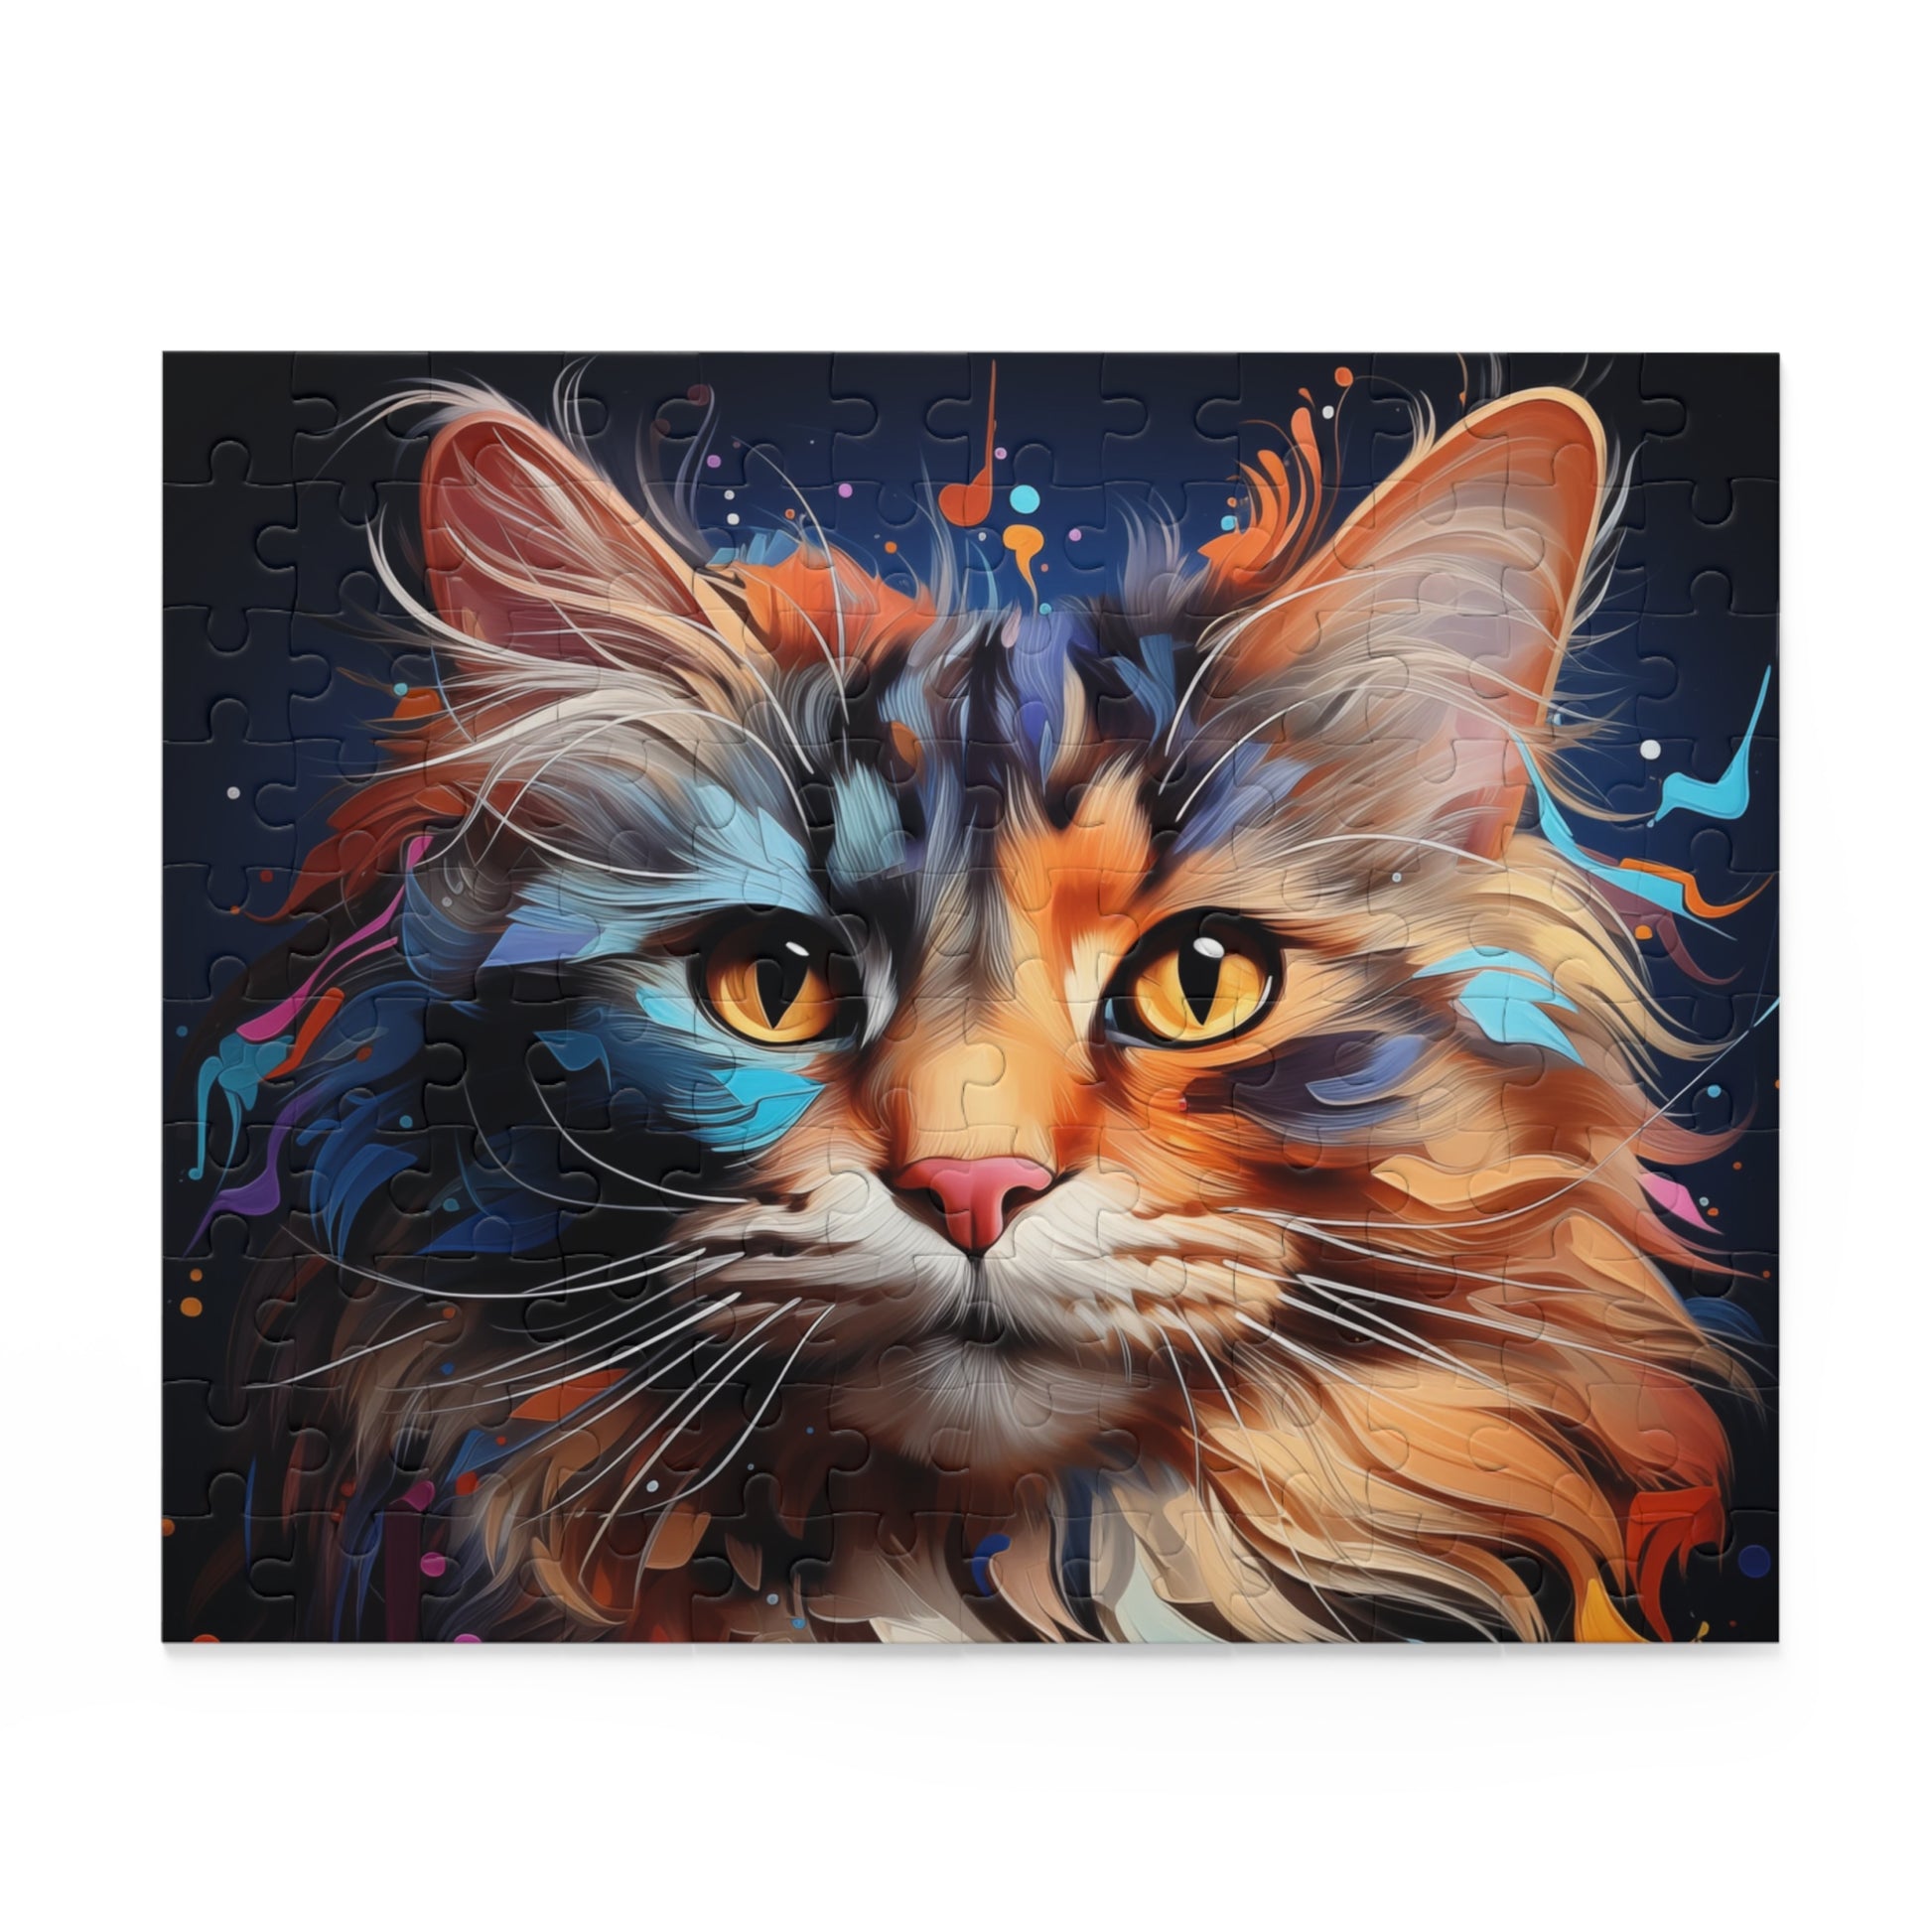 Watercolor Abstract Cat Jigsaw Puzzle for Boys, Girls, Kids Adult Birthday Business Jigsaw Puzzle Gift for Him Funny Humorous Indoor Outdoor Game Gift For Her Online-2